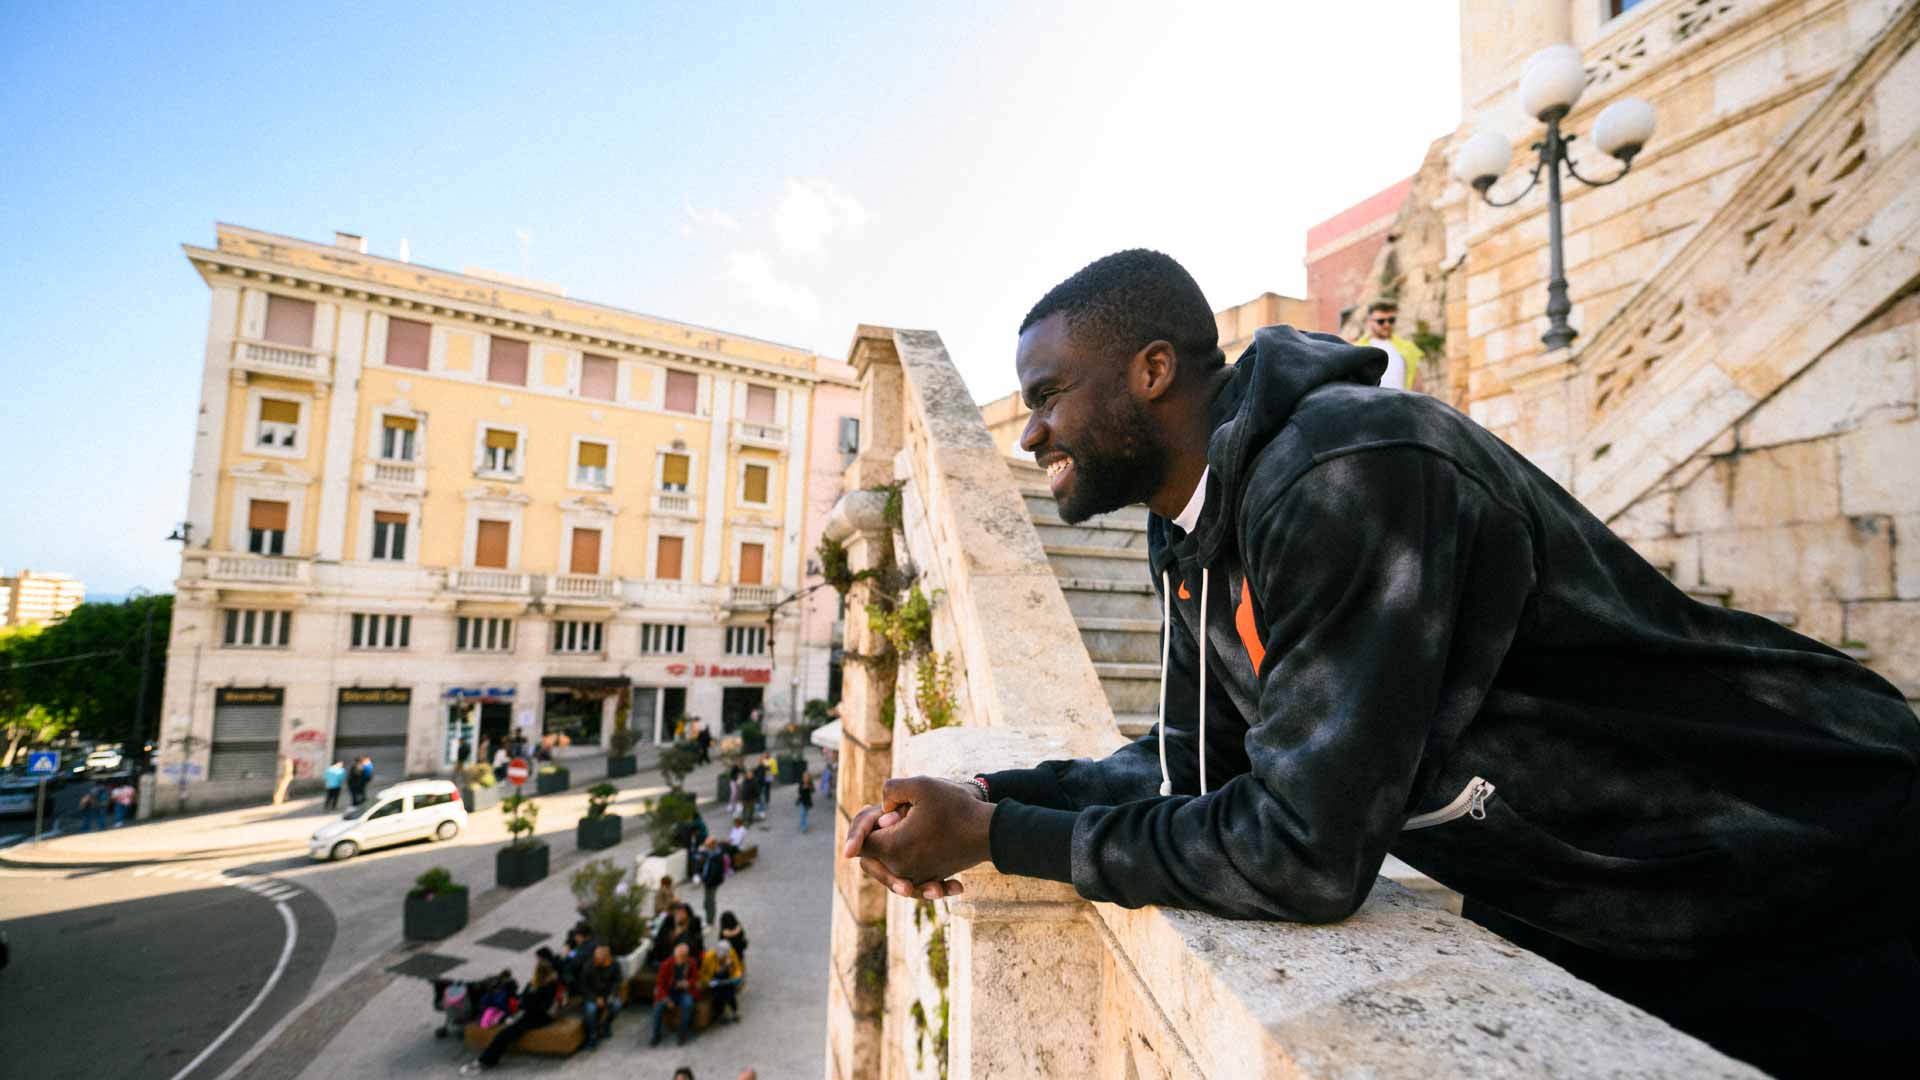 Espresso shots and tourist stops, Tiafoe living large at Cagliari Challenger